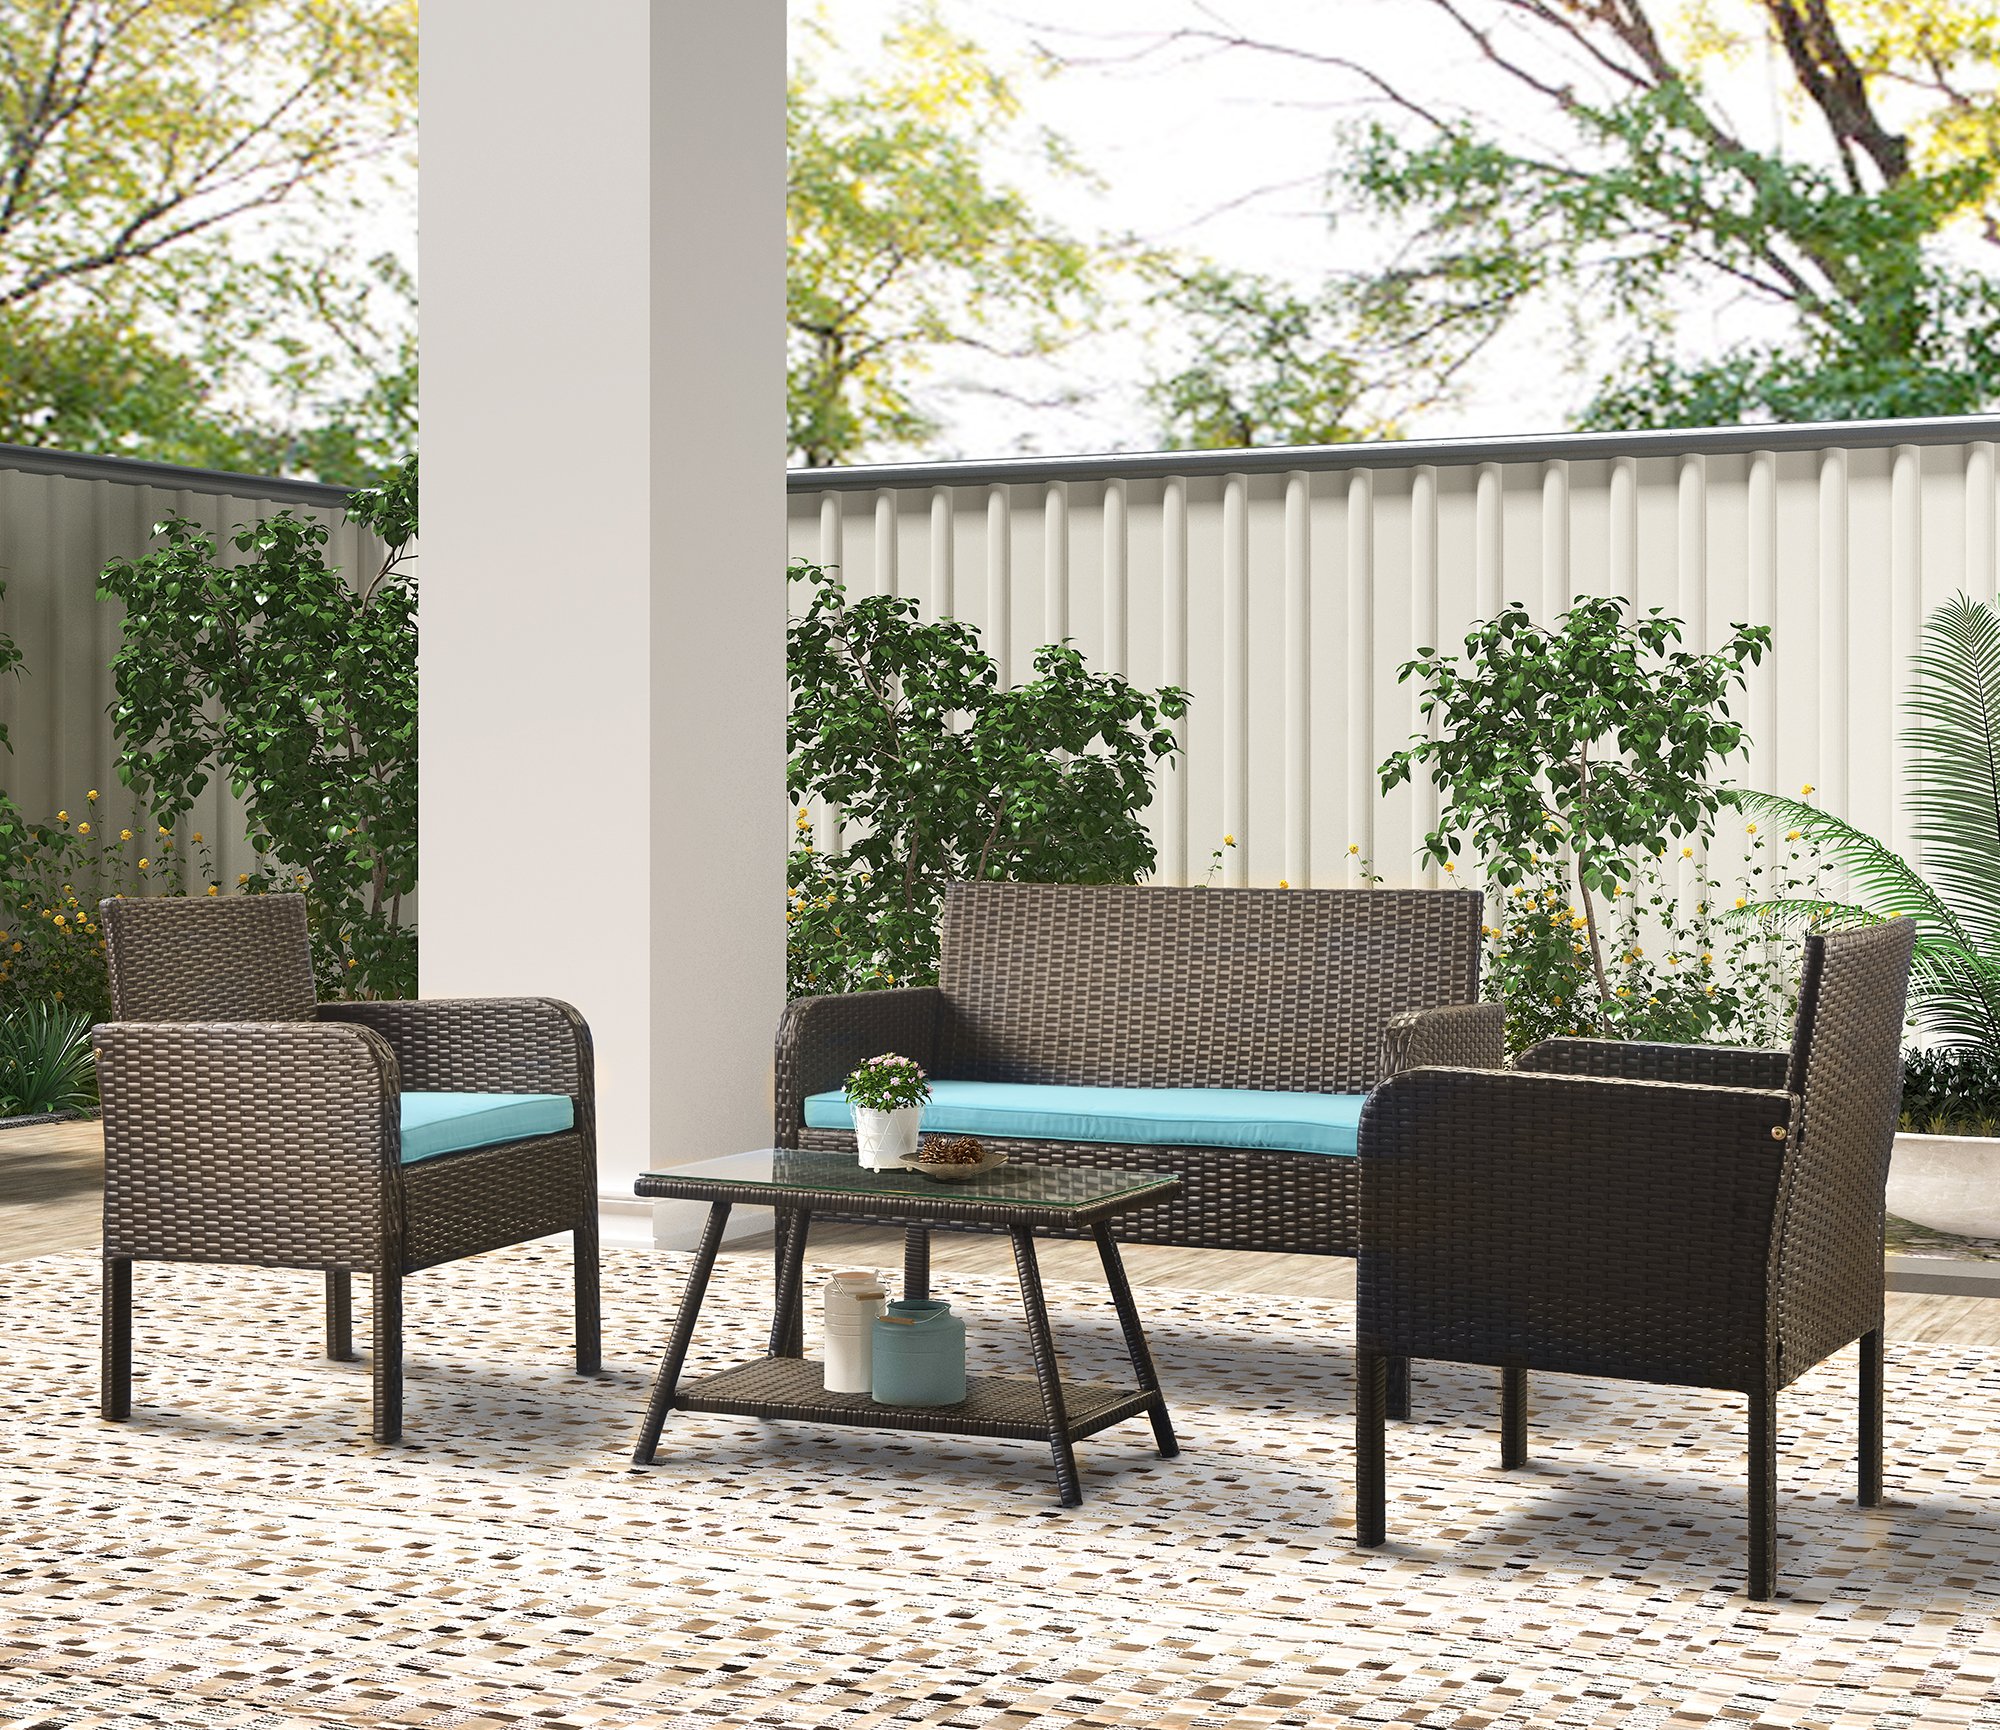 4 Piece Outdoor Patio Furniture Set, PE Rattan Wicker Sofa Set, Outdoor Sectional Furniture Chair Set with Cushions and Tea Table, Wicker Conversation Set for Backyard Lawn Porch Garden Poolside, B298 - image 1 of 7